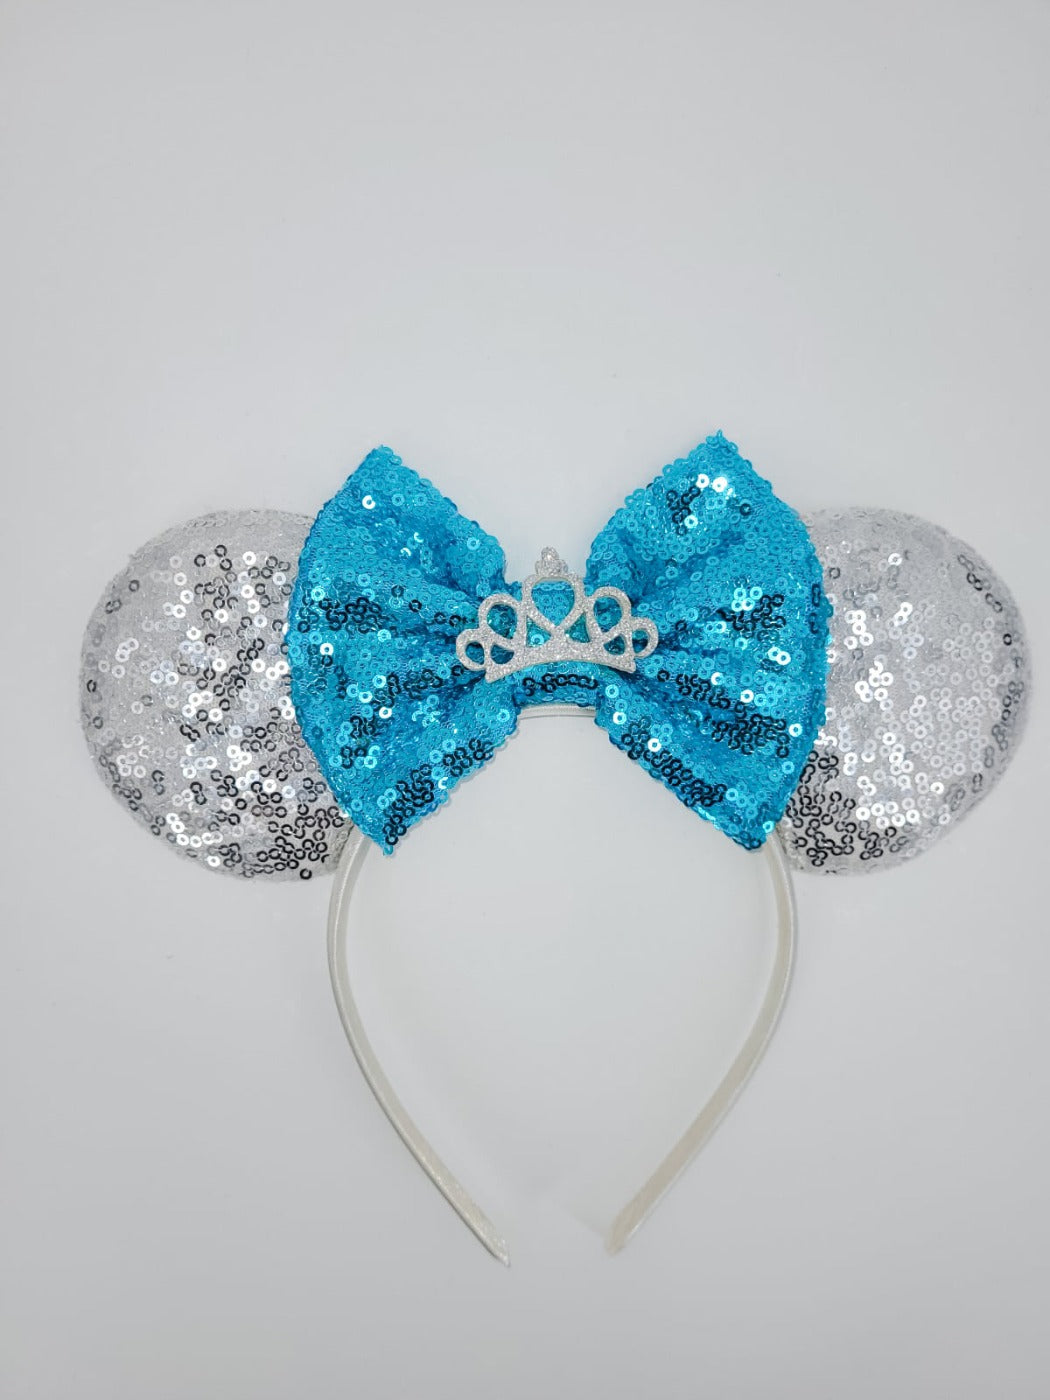 Silver Princess Themed Sequined Ear Headband with Blue Sequined Bow